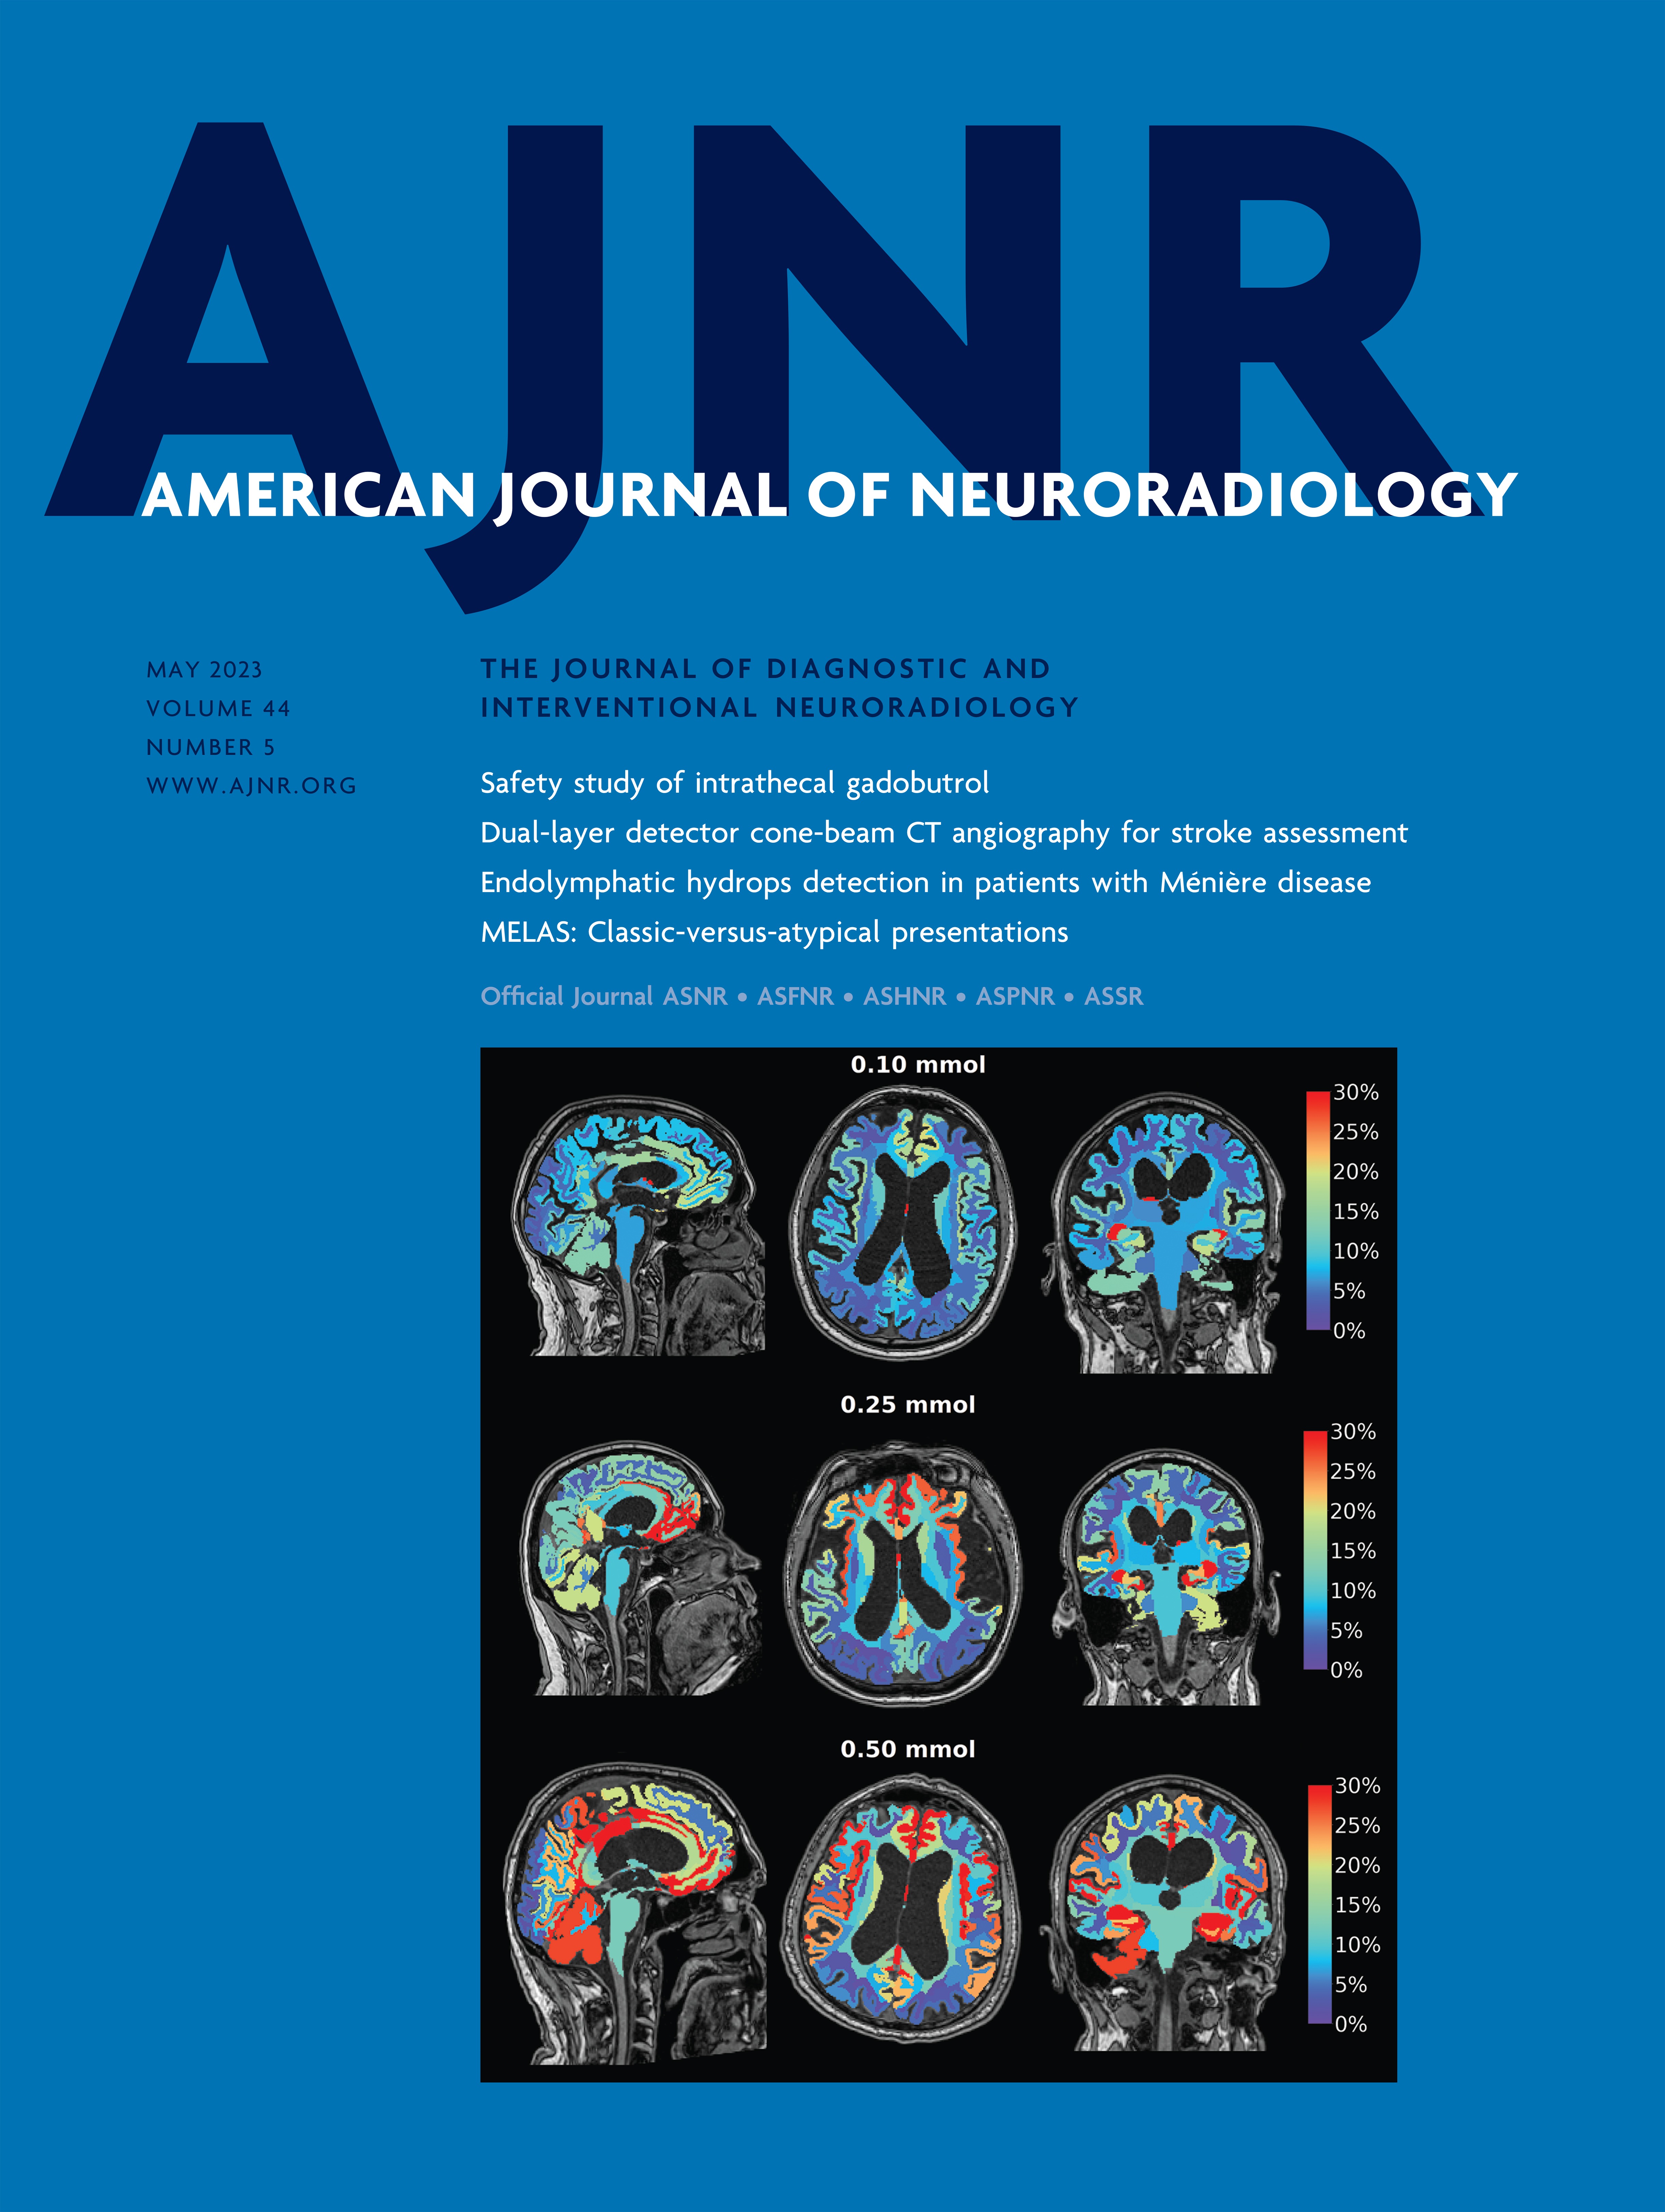 Post-COVID-19 Brain [18F] FDG-PET Findings: A Retrospective Single-Center Study in the United States [ADULT BRAIN]